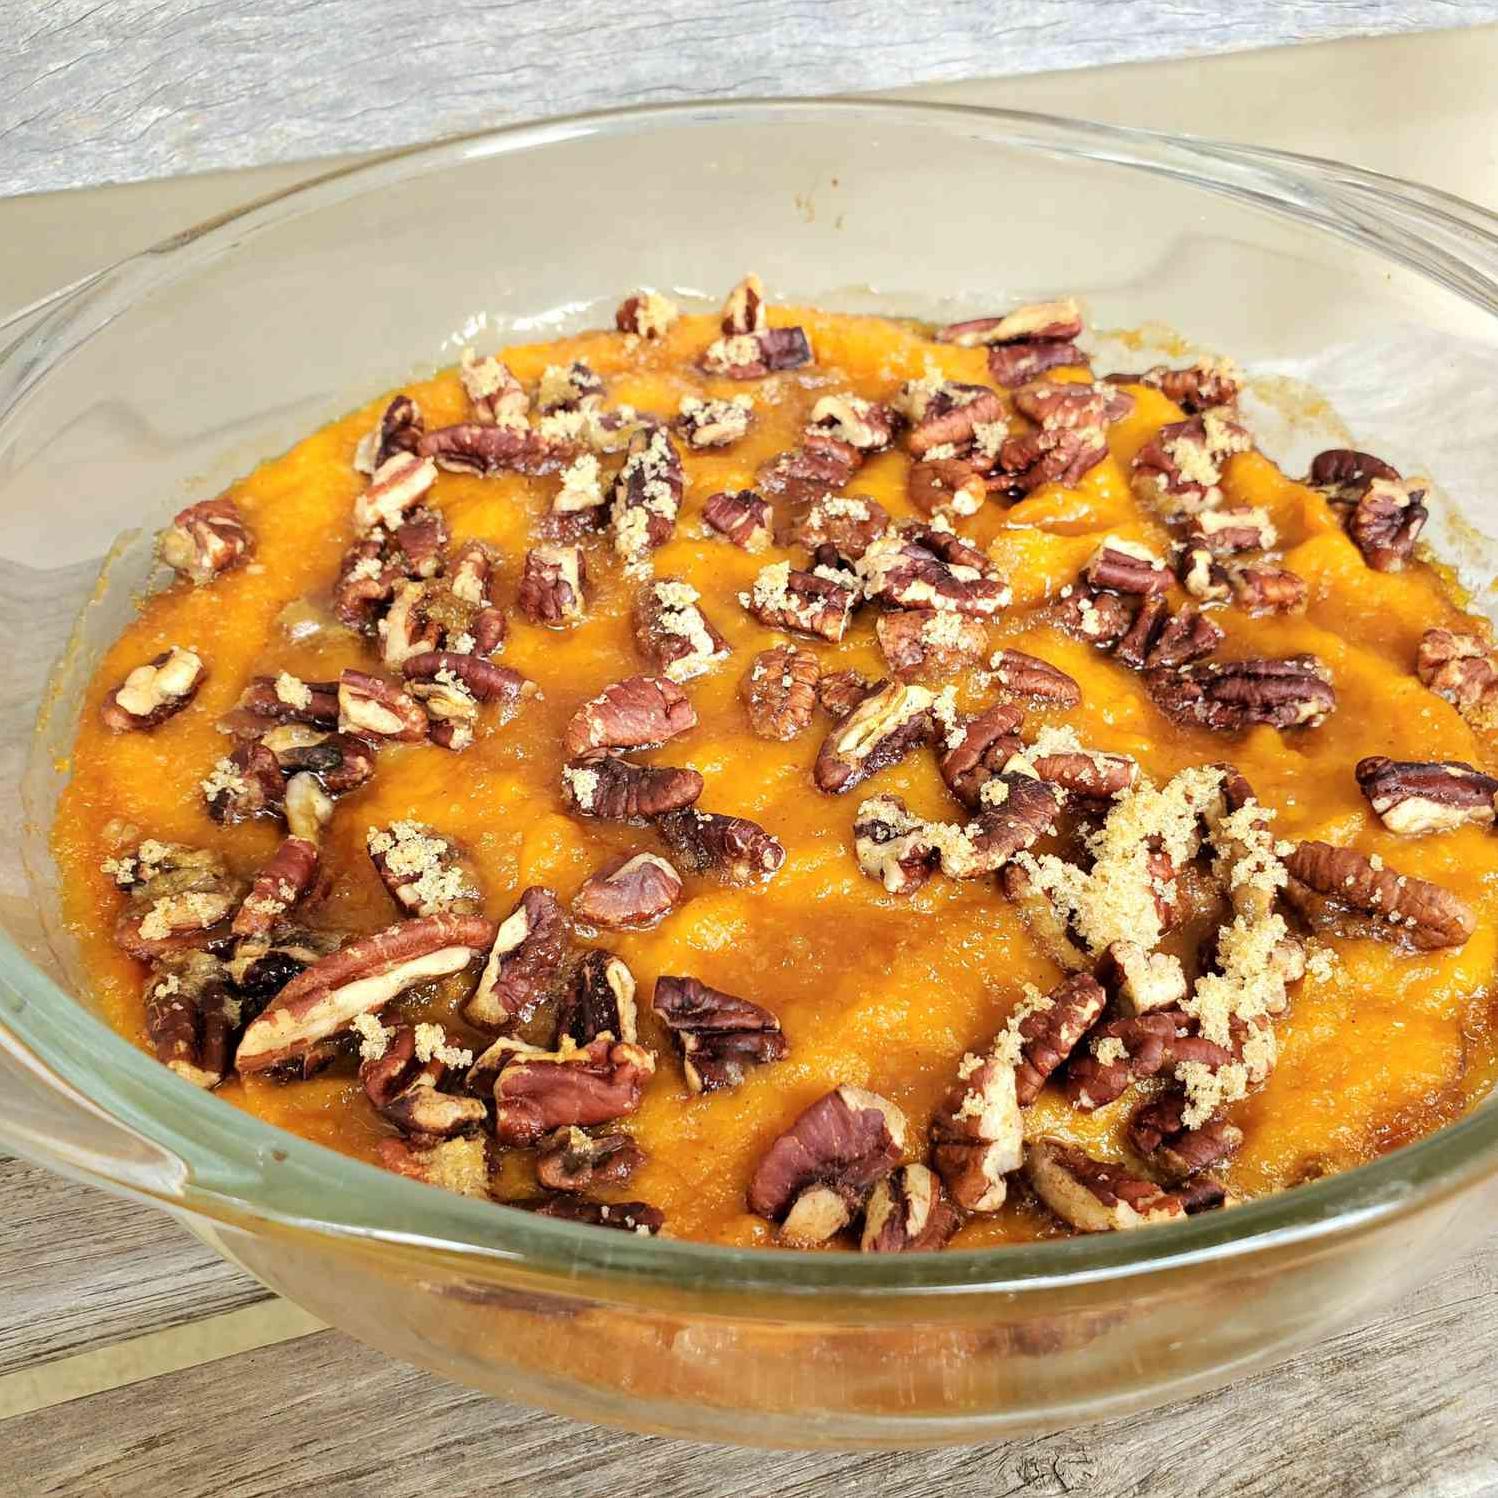 Delicious Sweet Potato Recipe for Your Next Meal